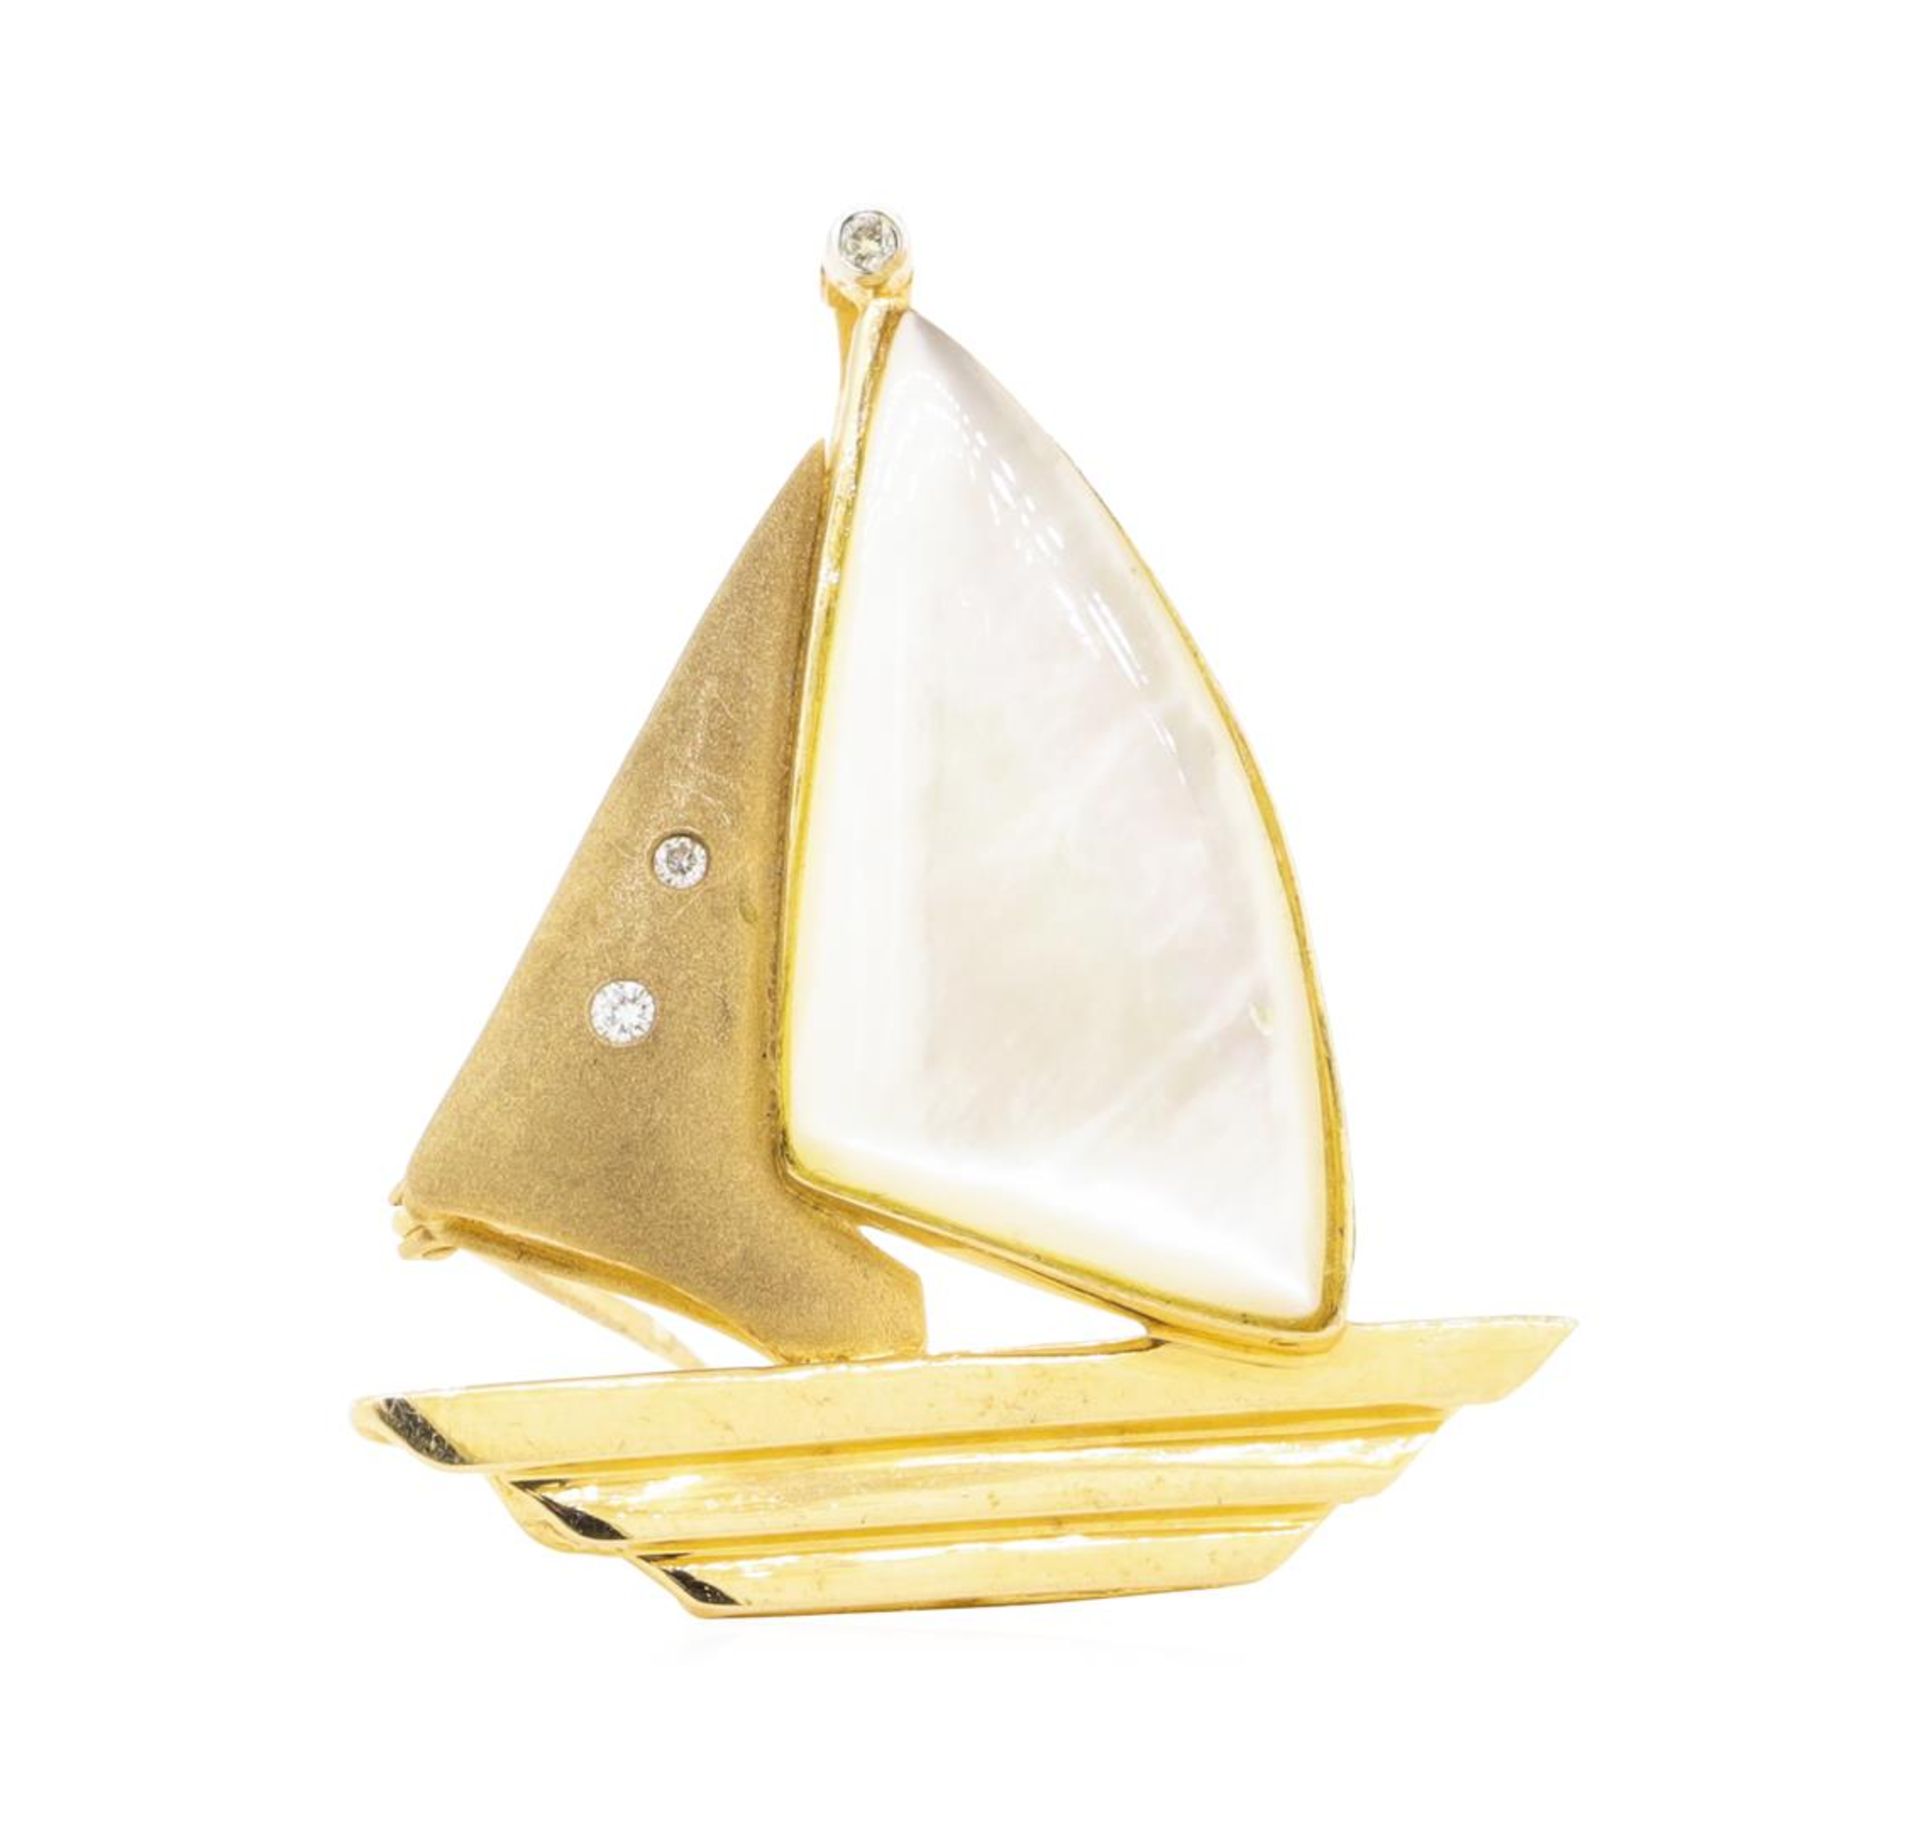 0.06ctw Diamond and Mother of Pearl Boat Enhancer/Pin - 14KT Yellow Gold